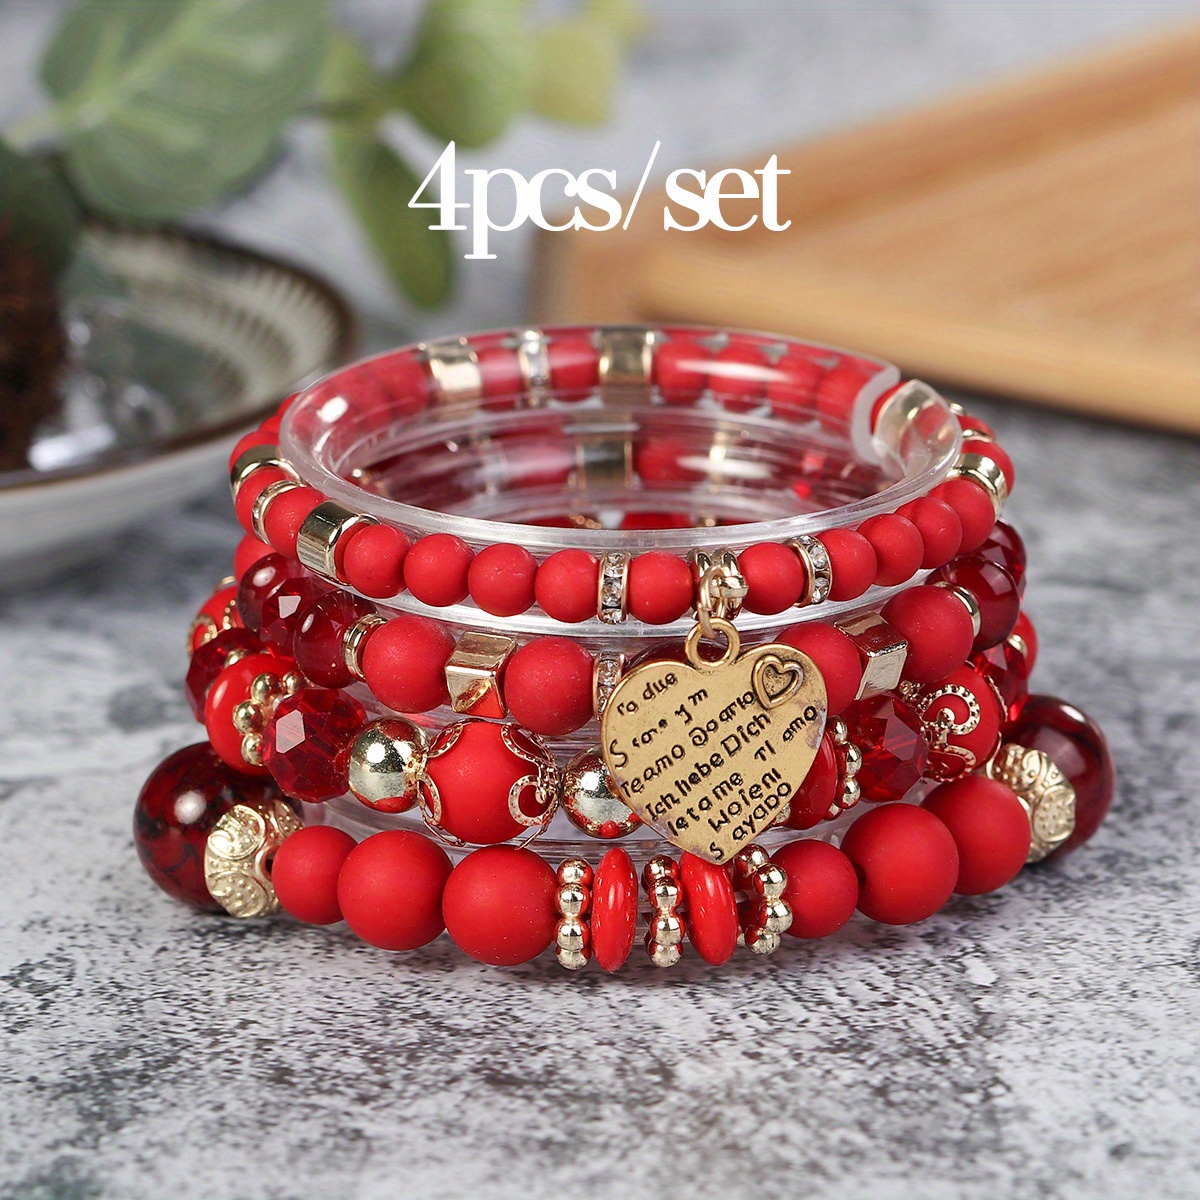 Boho Chic Glass Bead & Knotted Leather Bracelet Kit (Red & Copper) –